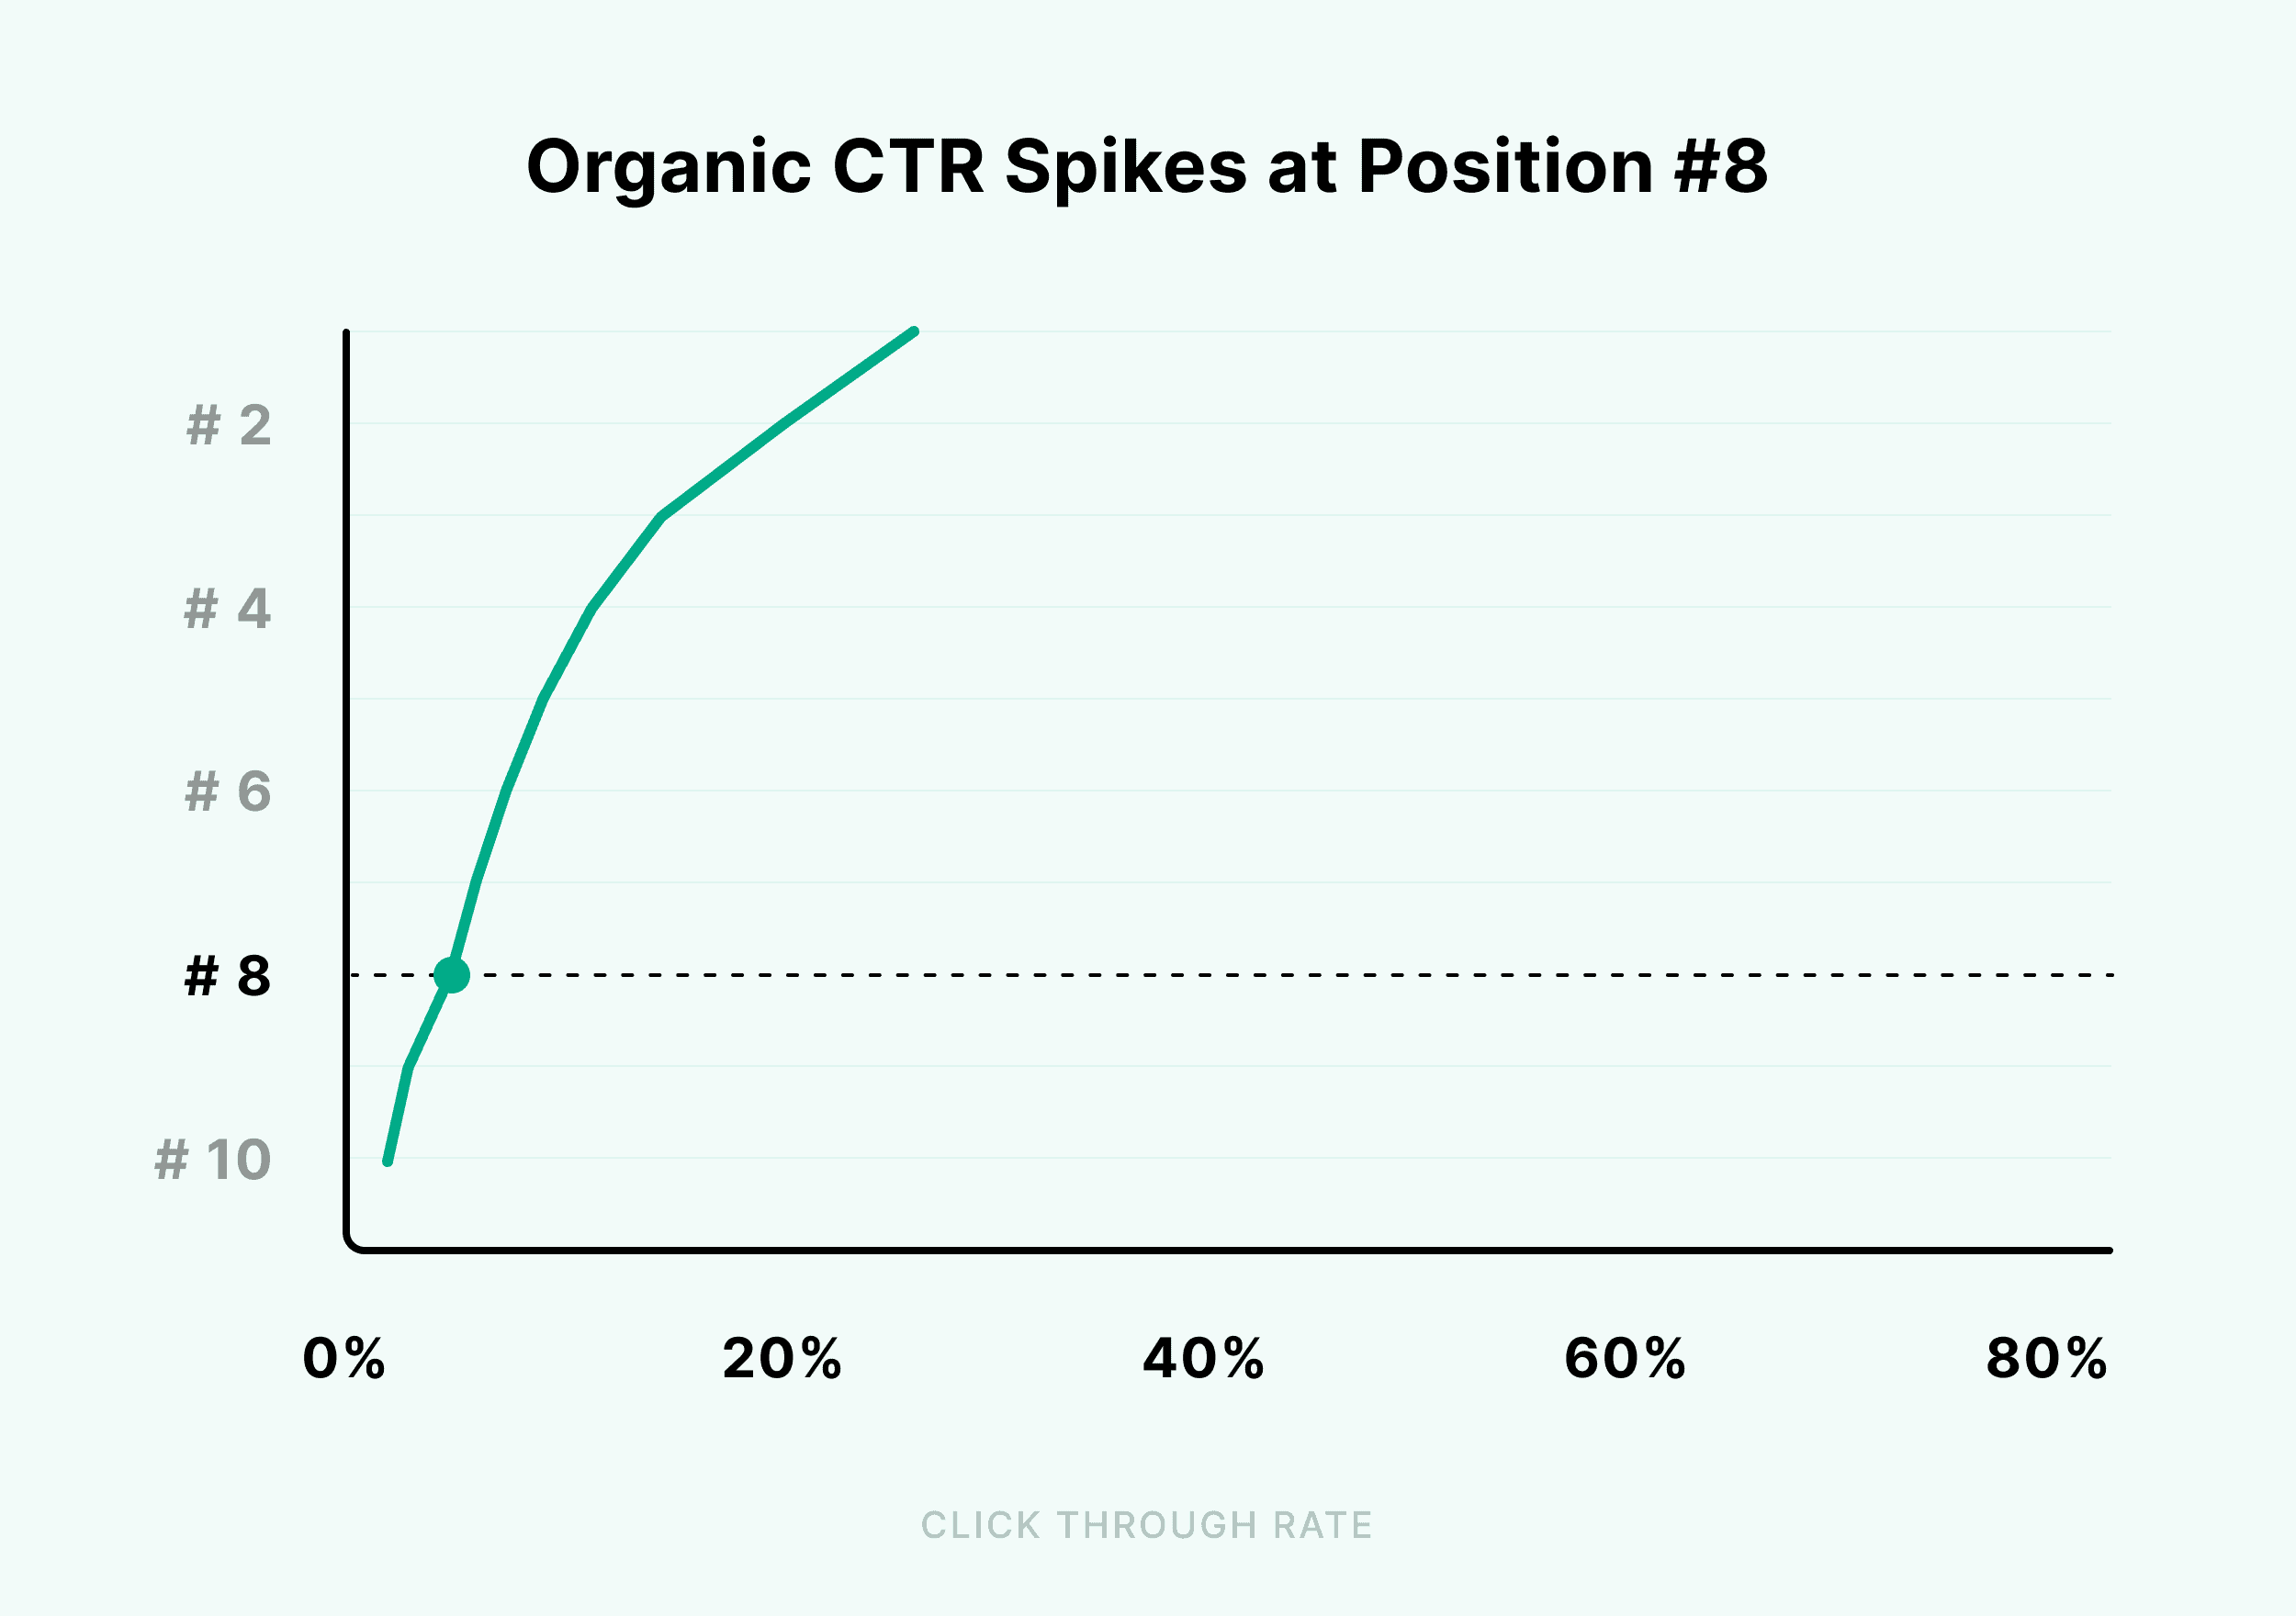 Organic CTR spikes at position 8